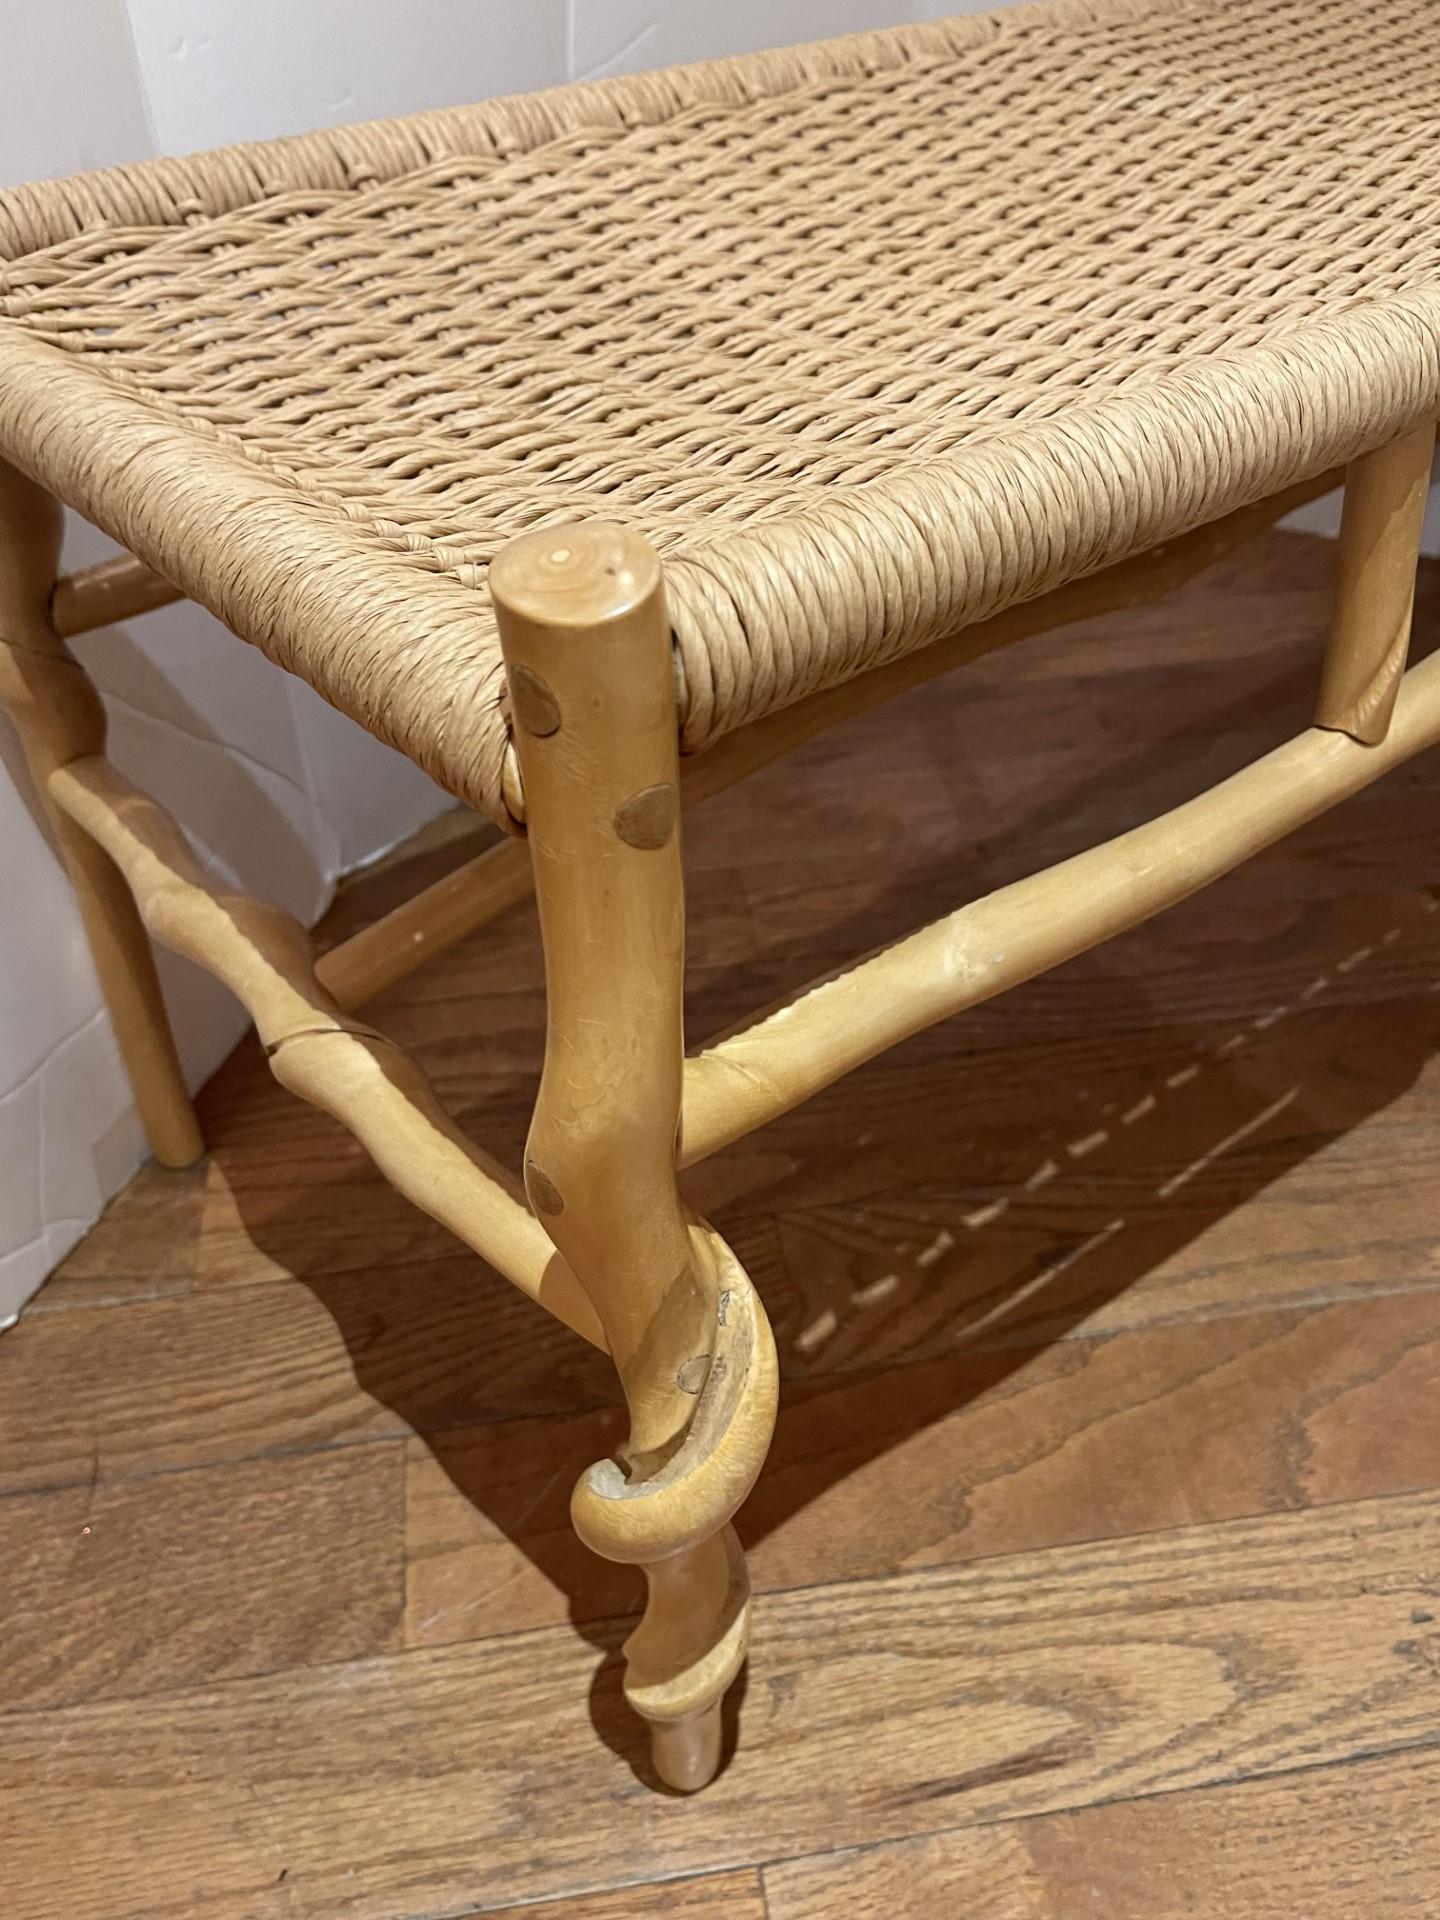 Works by Internationally Renowned Studio Craft Designer David N Ebner, from the Sassafras Twisted Stick Collection. One of three ever made in this size,of twisted wood and woven rush seat. Ebner has helped redefine studio craft furniture as